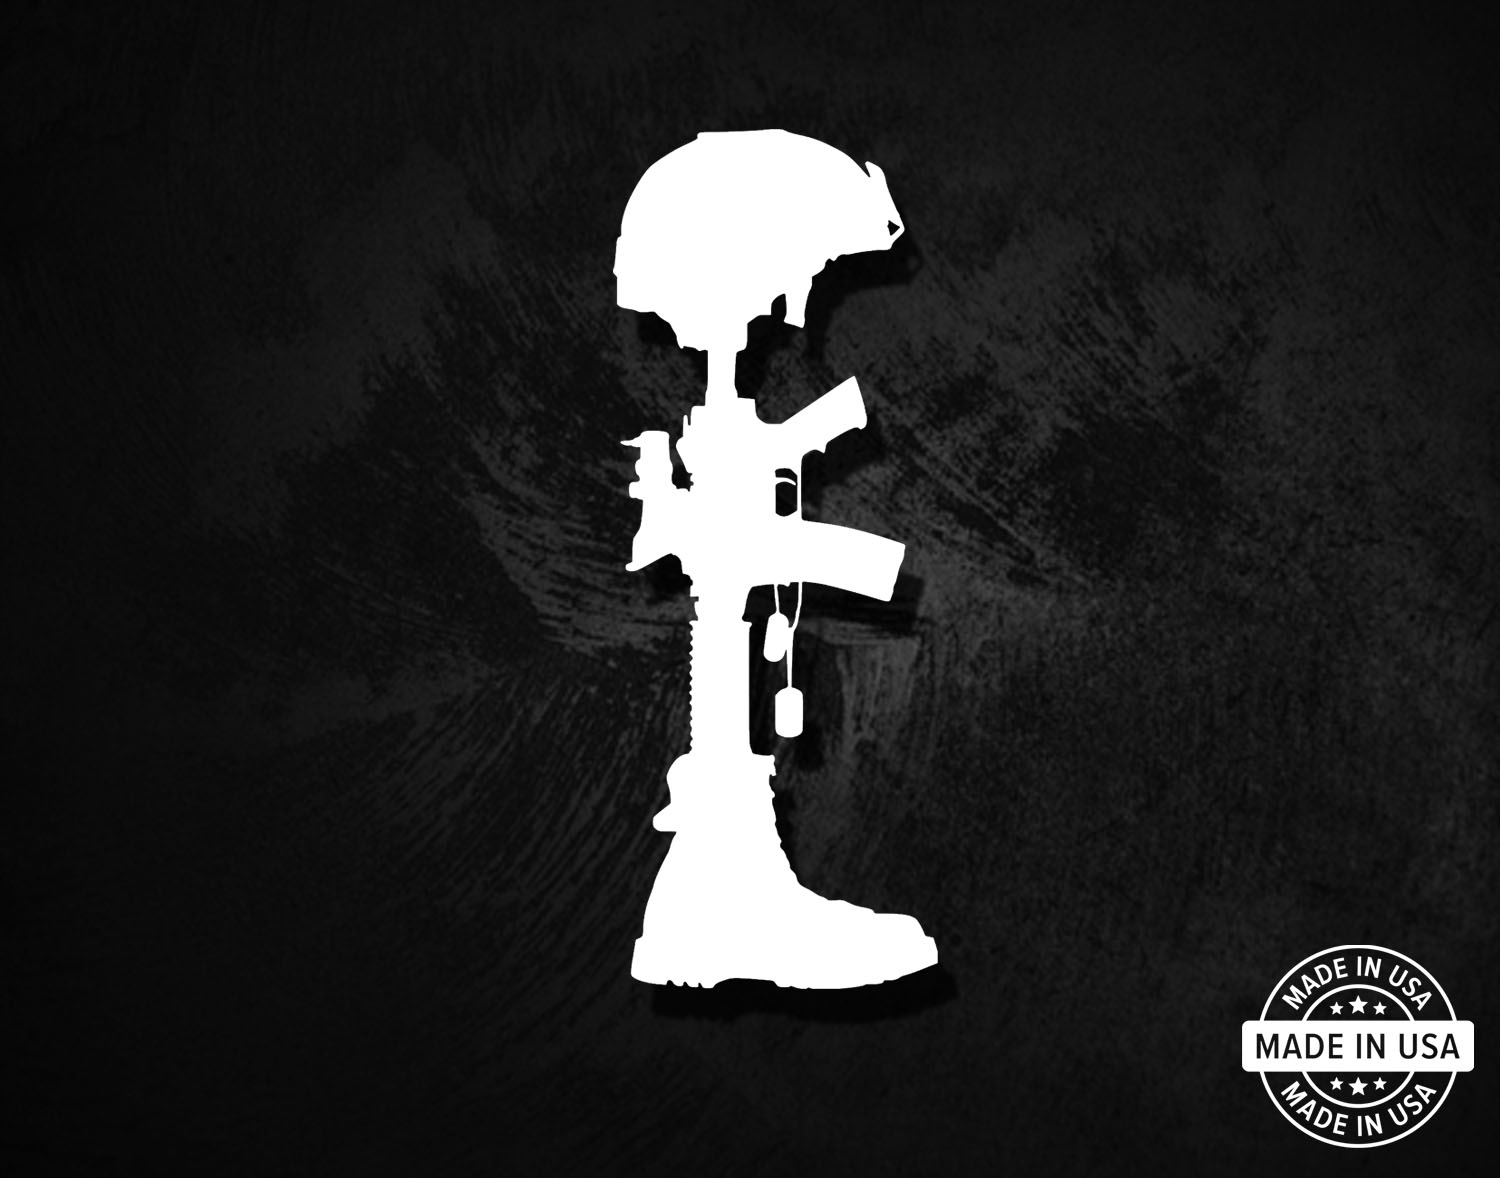 Fallen Soldier - Helmet, Rifle, Boots, Dog Tags Decal